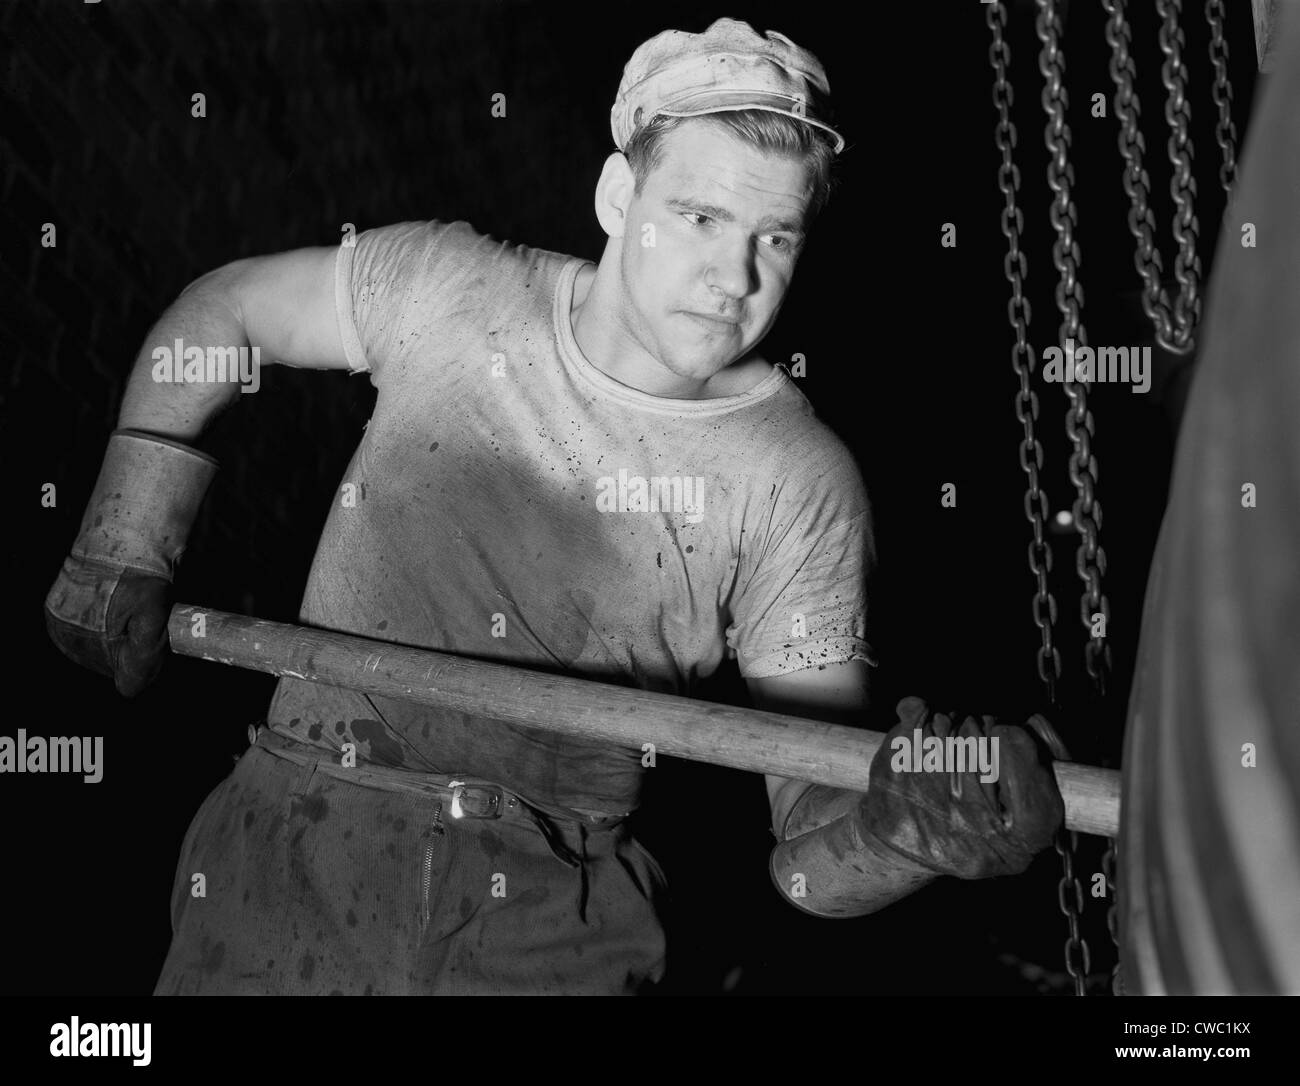 Defense worker at the Goodrich rubber plant molding rubber with a wooden paddle. December 1941. Stock Photo